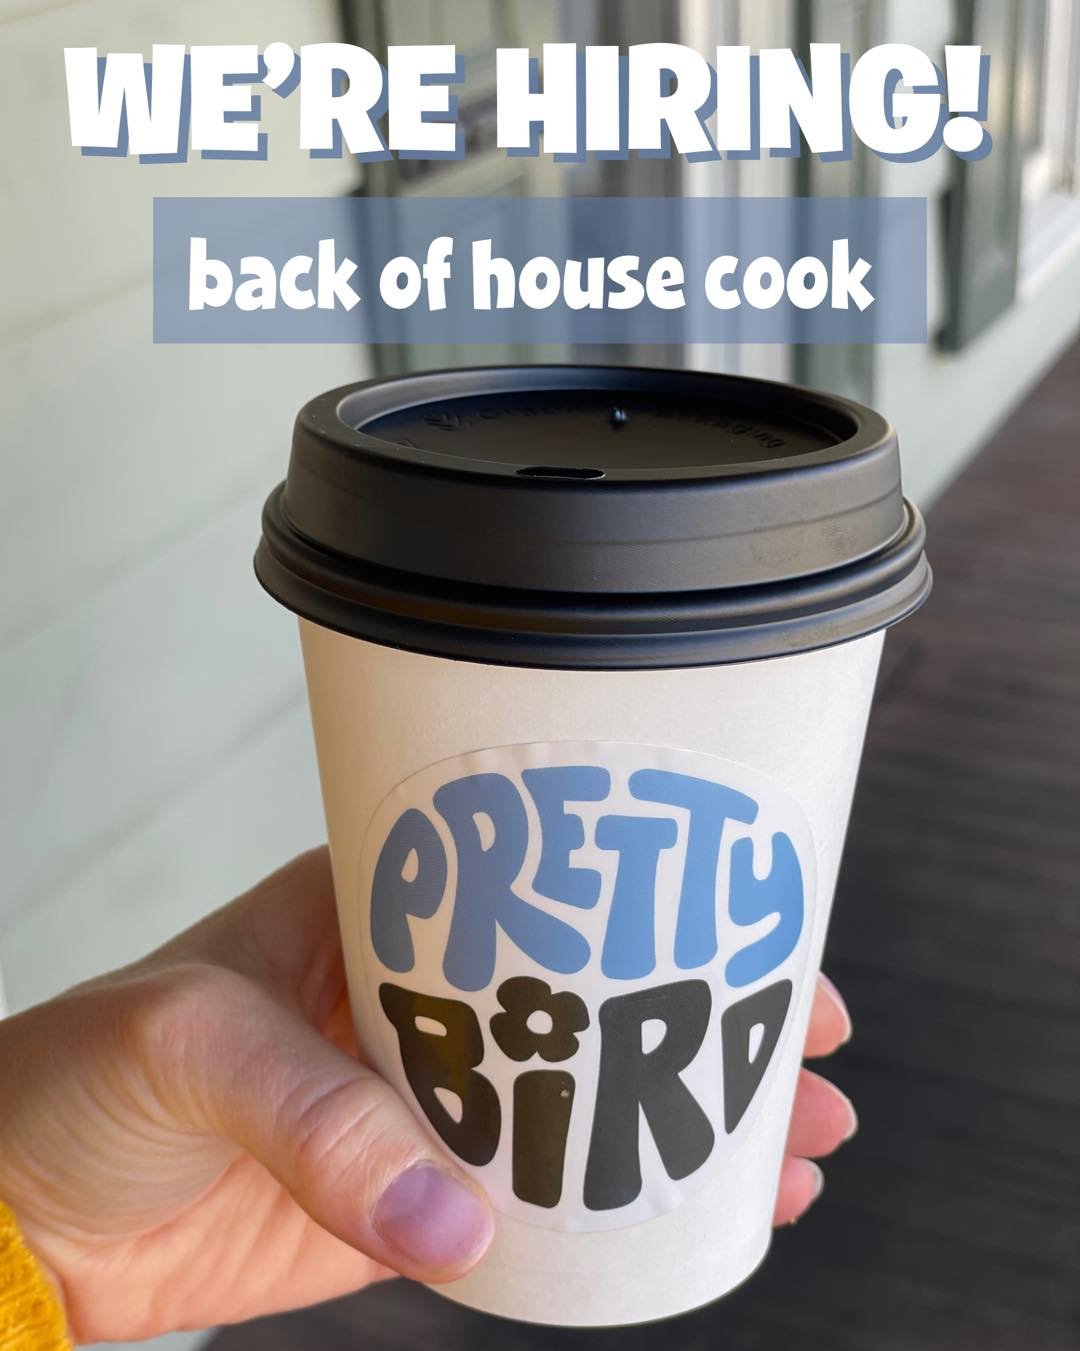 JOIN OUR TEAM!

we are looking for someone to join our bird gang in the back of house as a cook. ideally, this candidate is available for 3-4 mornings, is on-time, and enjoys working in a fast paced environment. bonus points if you enjoy coffee&mdash